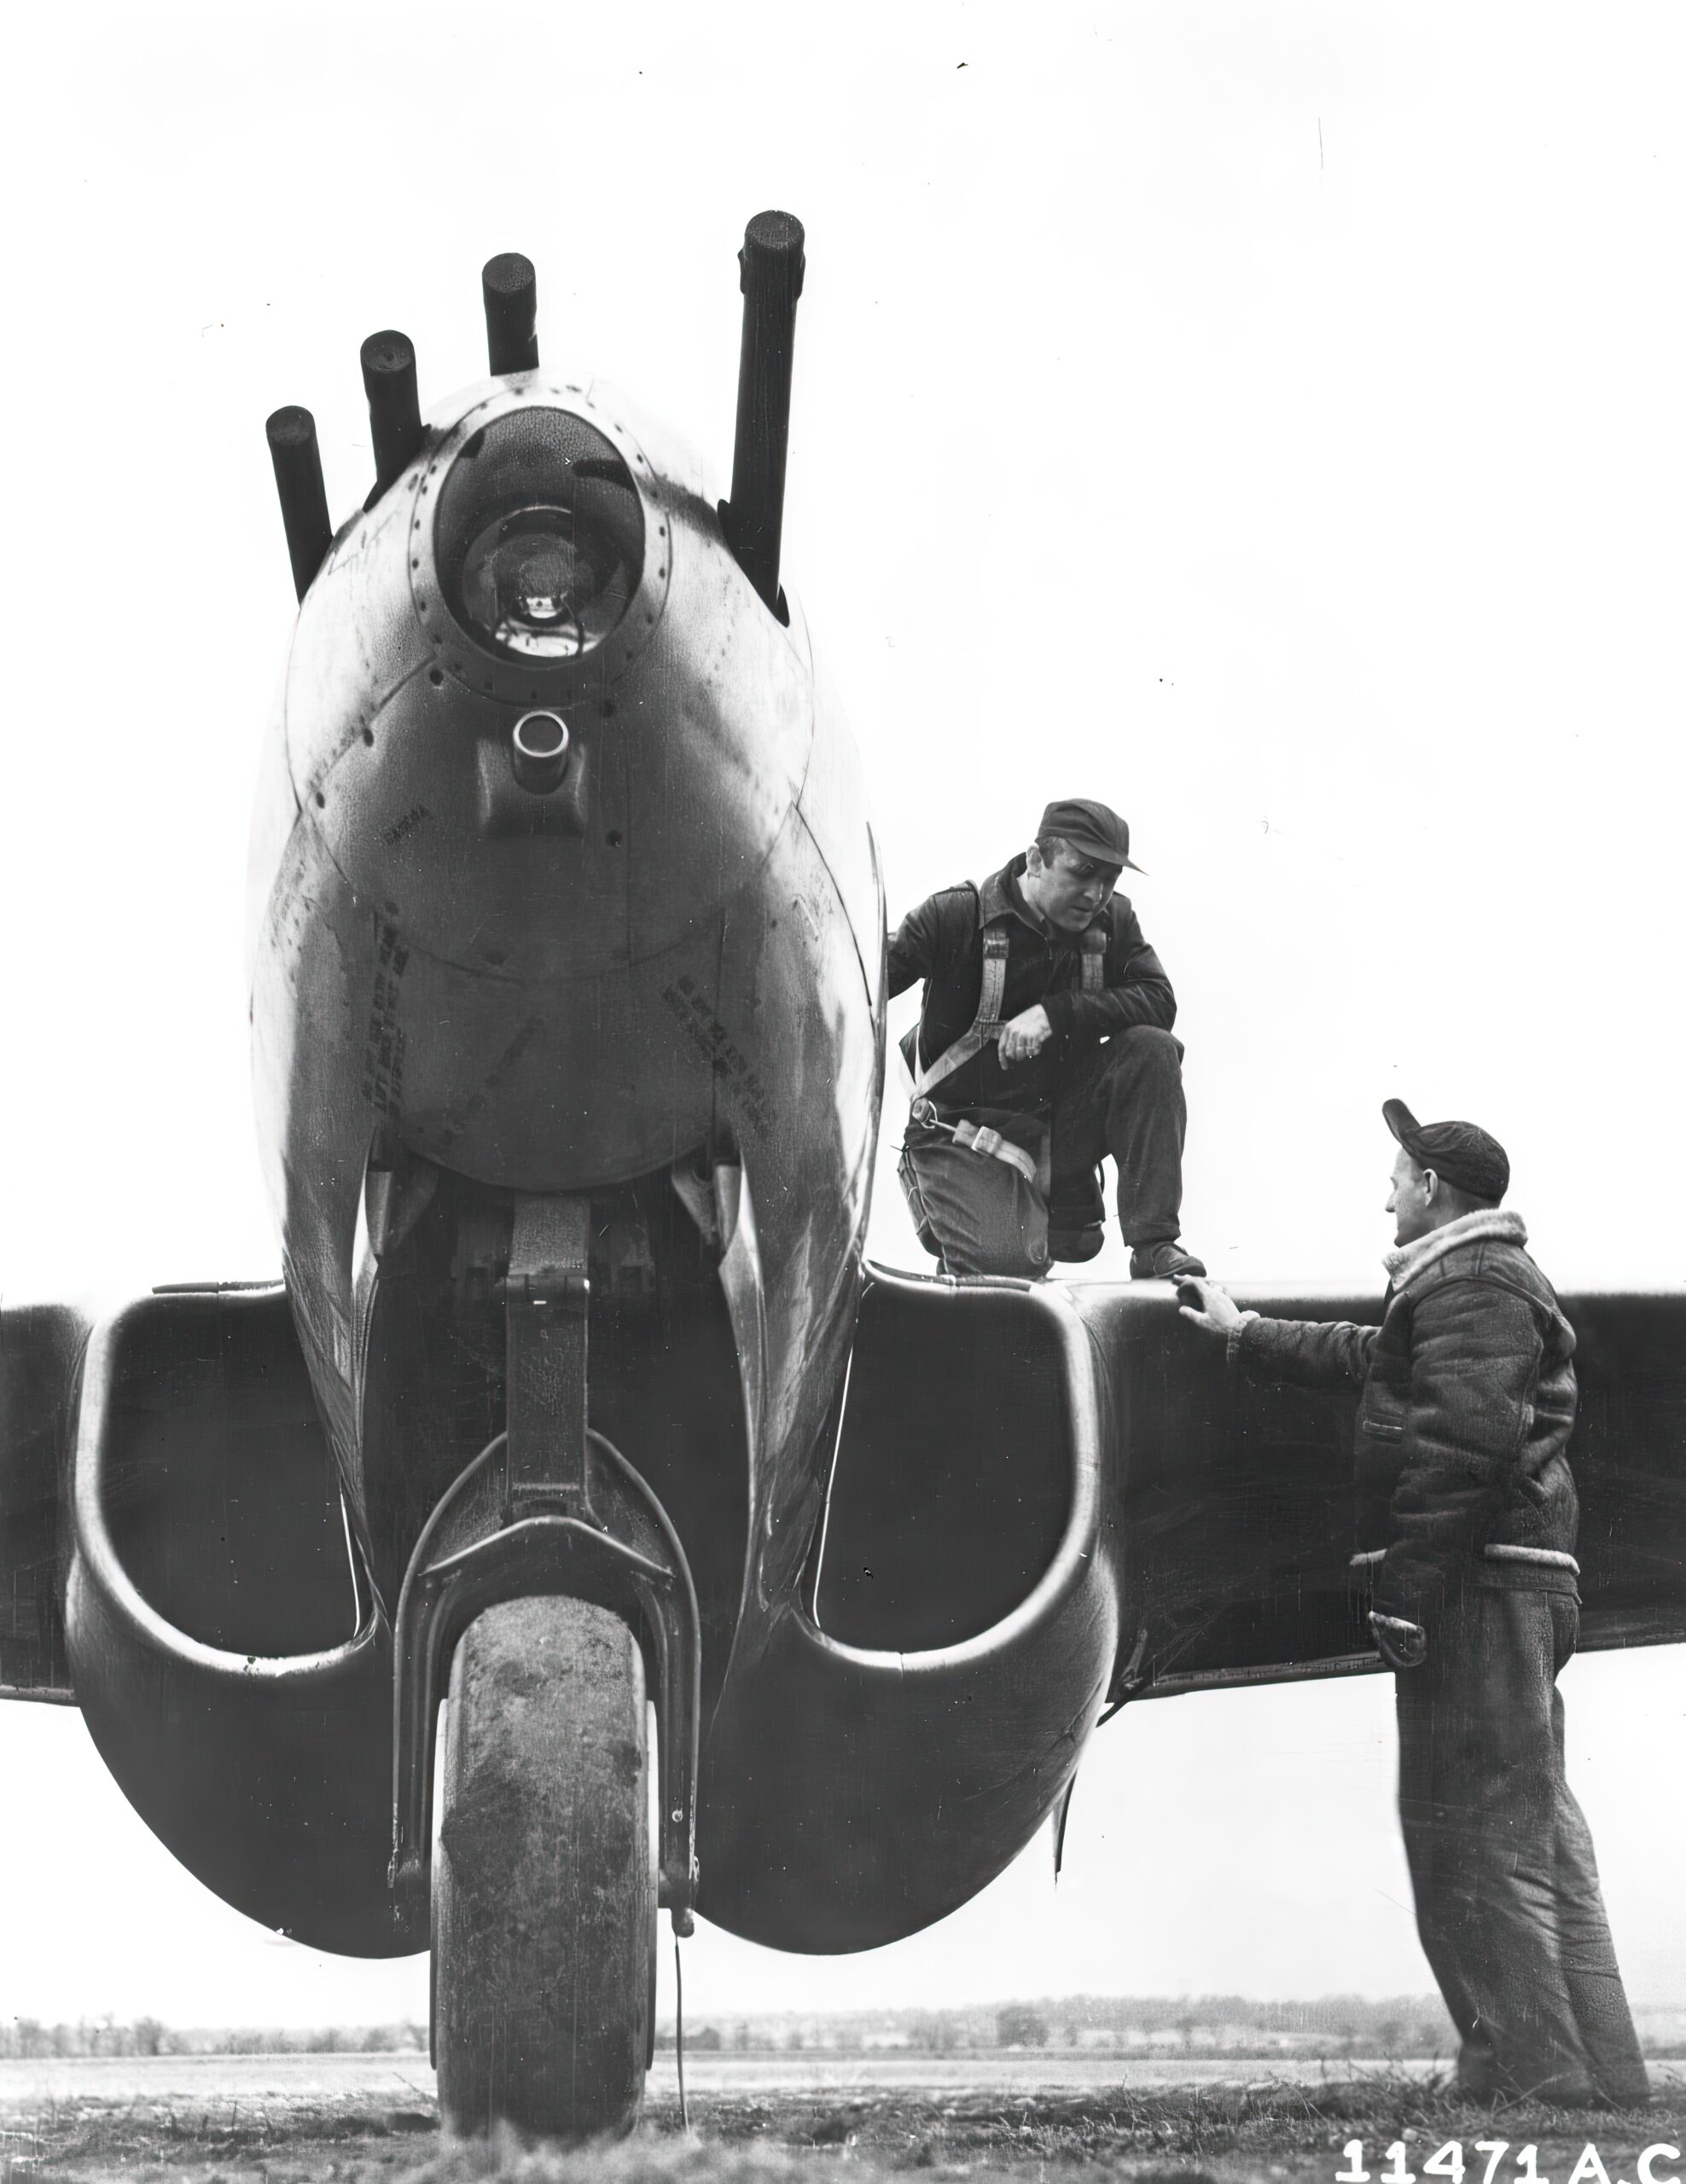 P-59B showing the nose armament